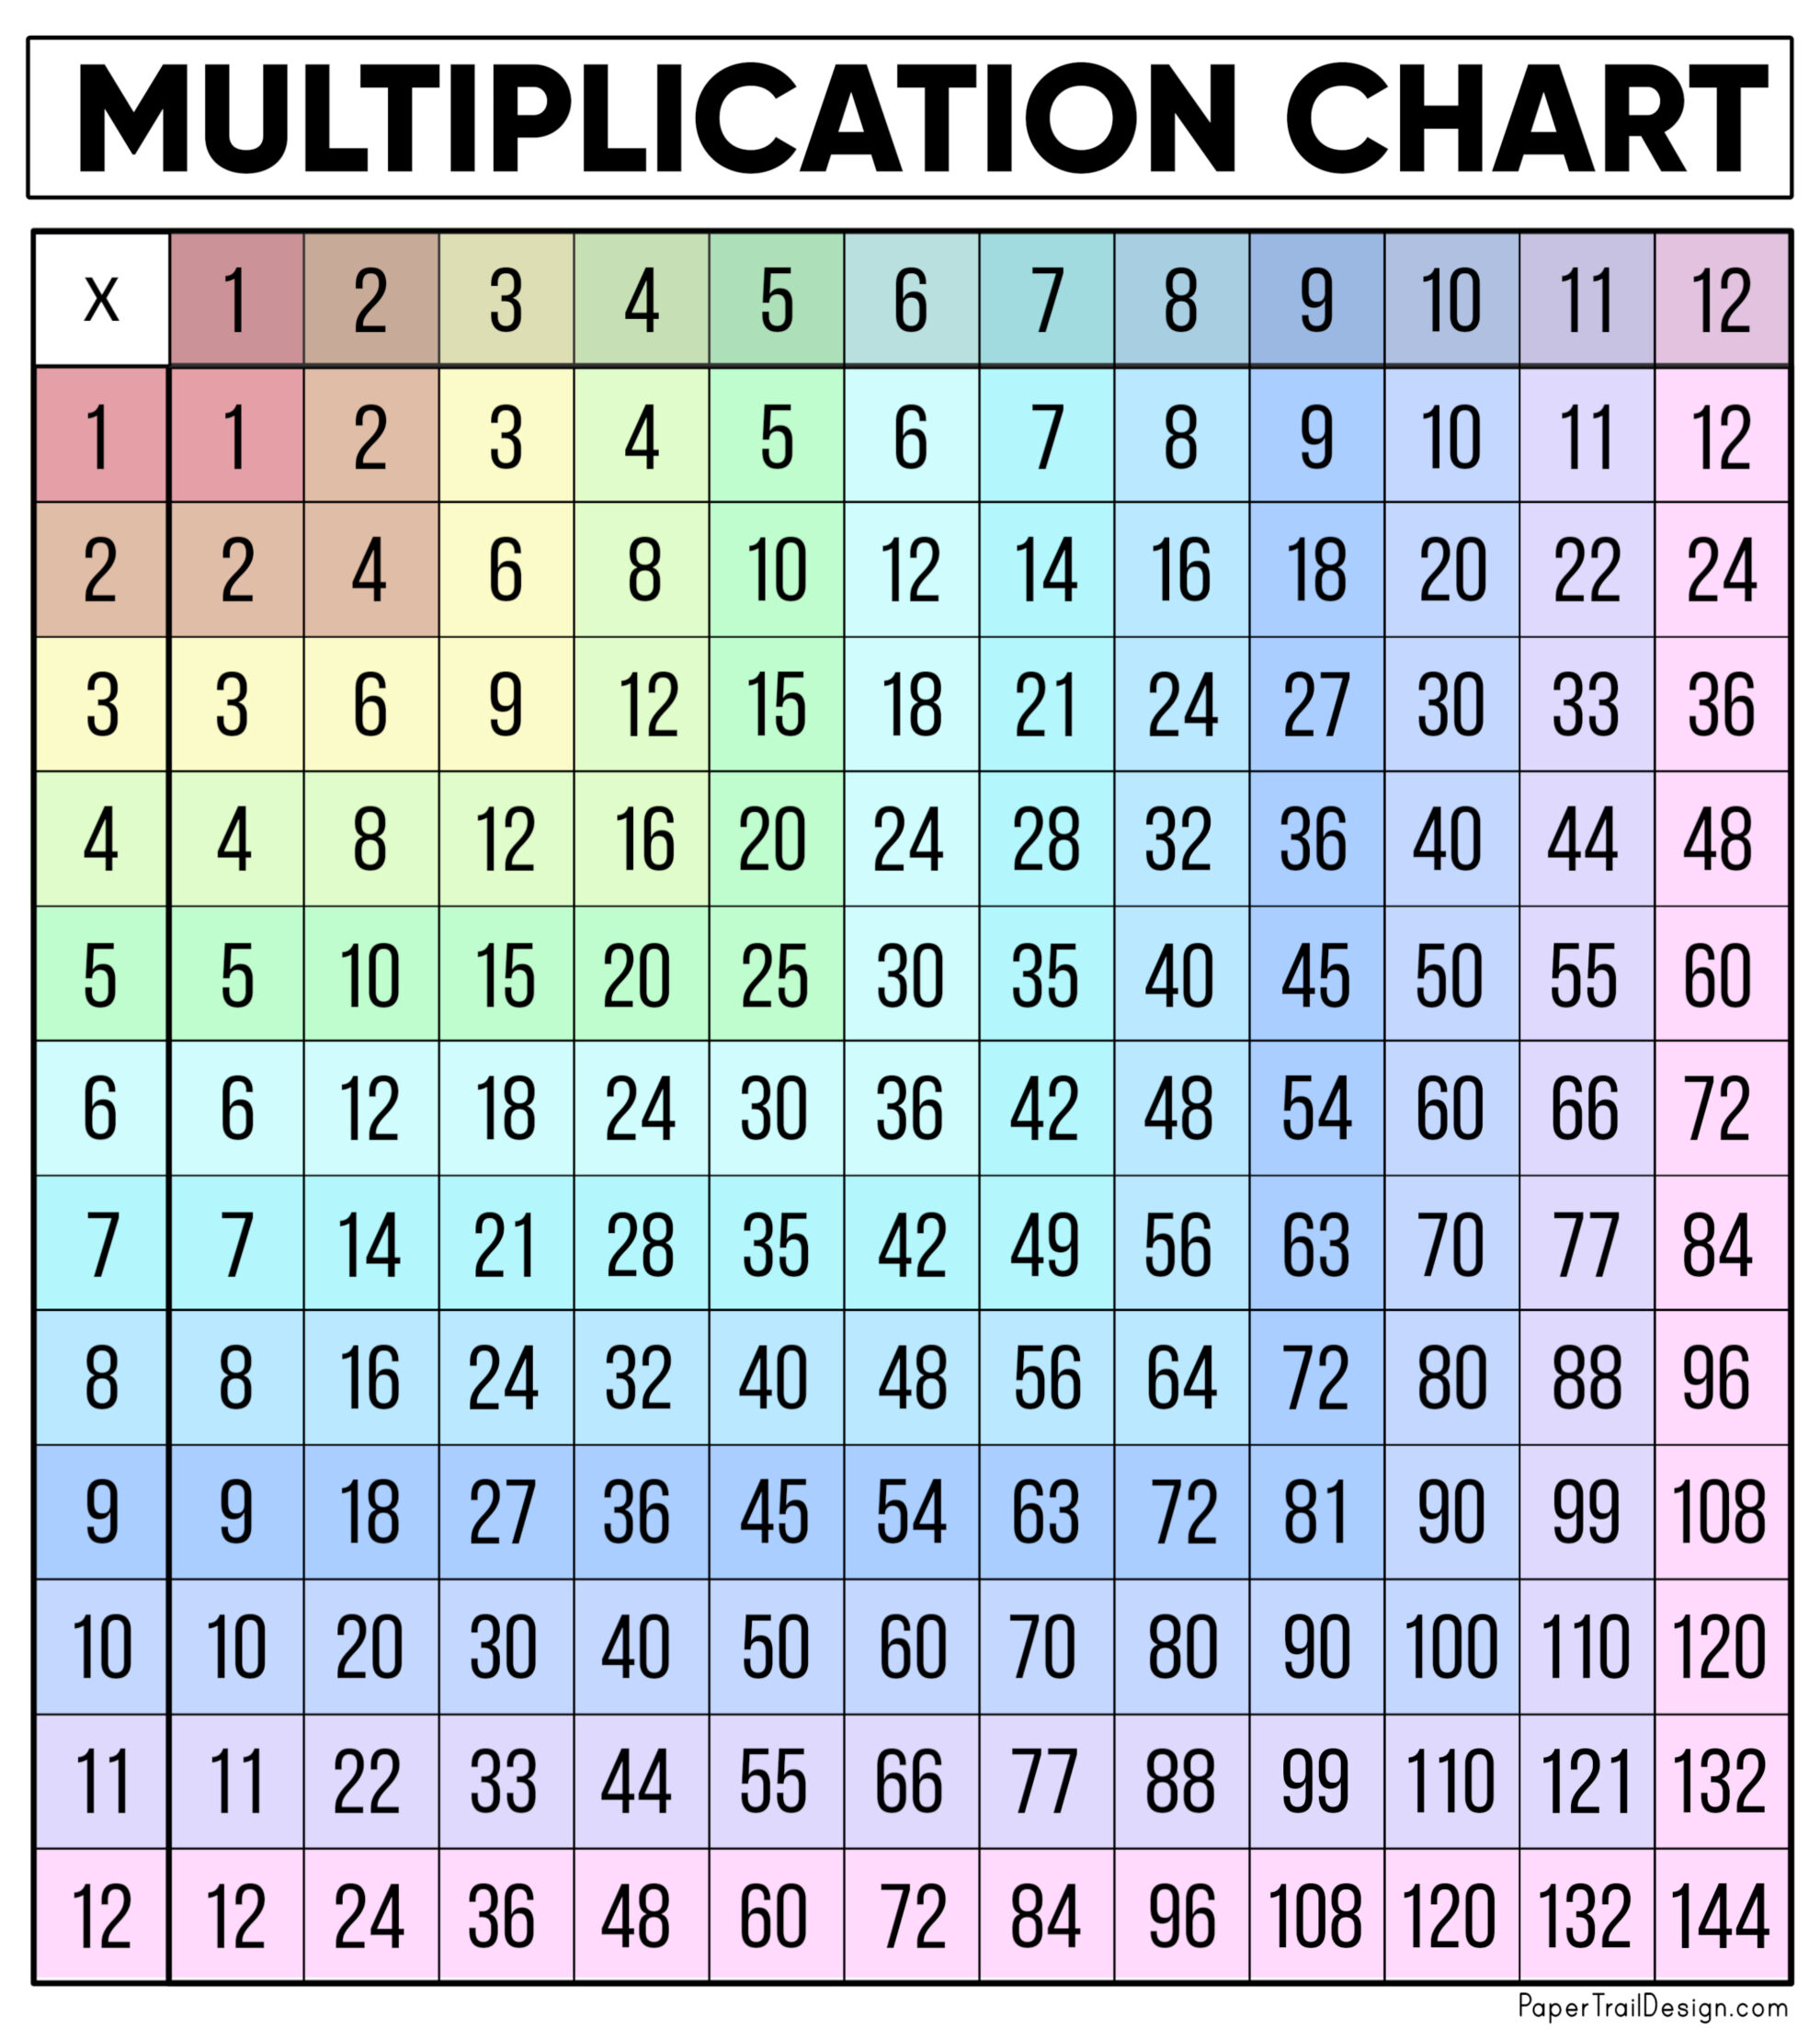  Printable Multiplication Table Wheel This Can Help Students Focus On The Times Tables Rather 